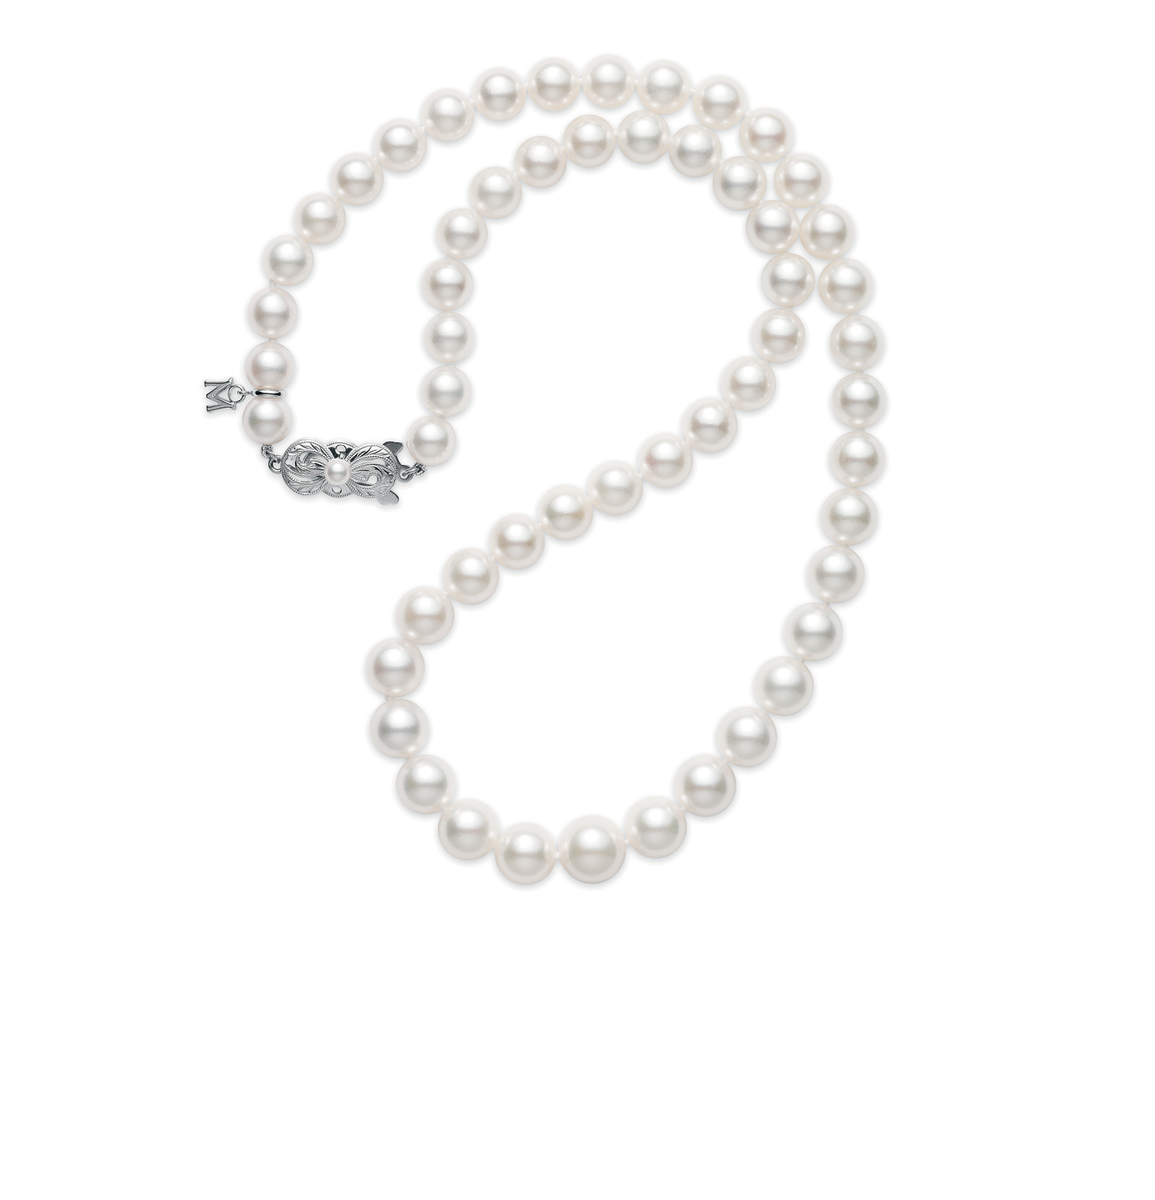 Graduated A1 9x7mm Akoya Pearl Necklace | Mikimoto | Fink's